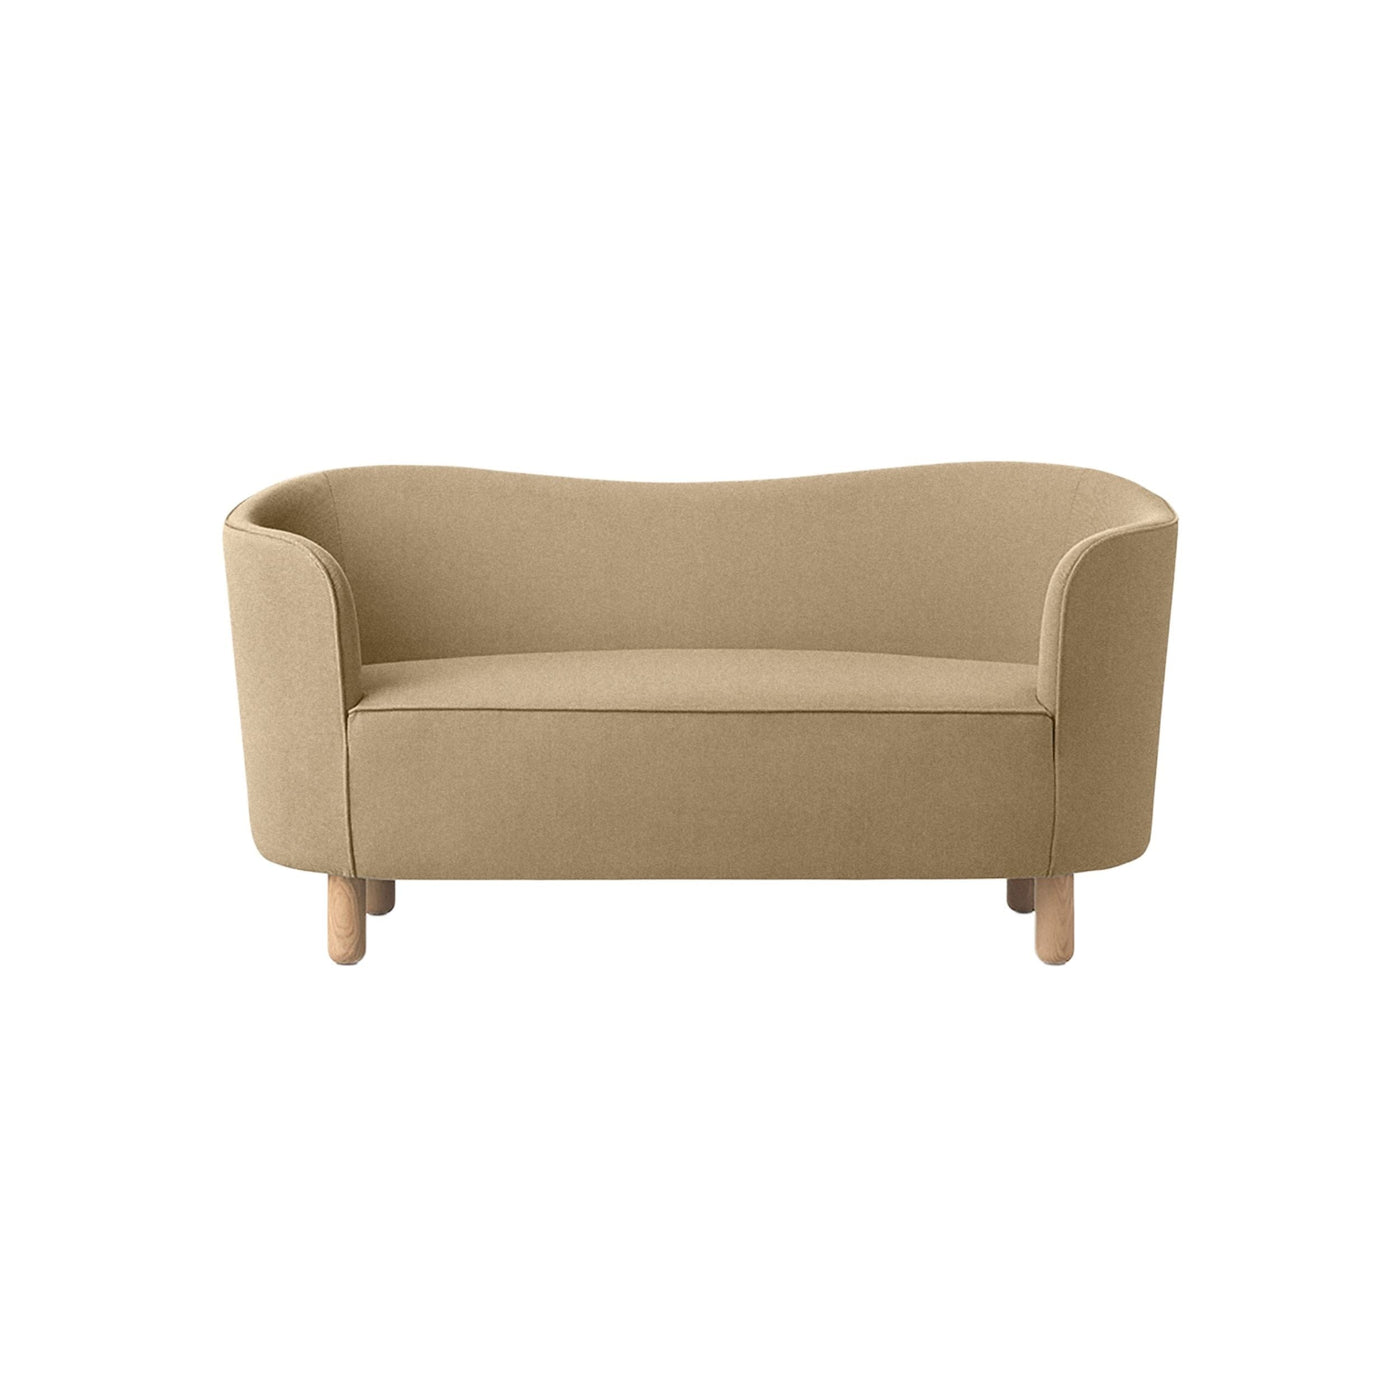 By Lassen Mingle sofa with smoked oak legs. Made to order from someday designs. #colour_vidar-323